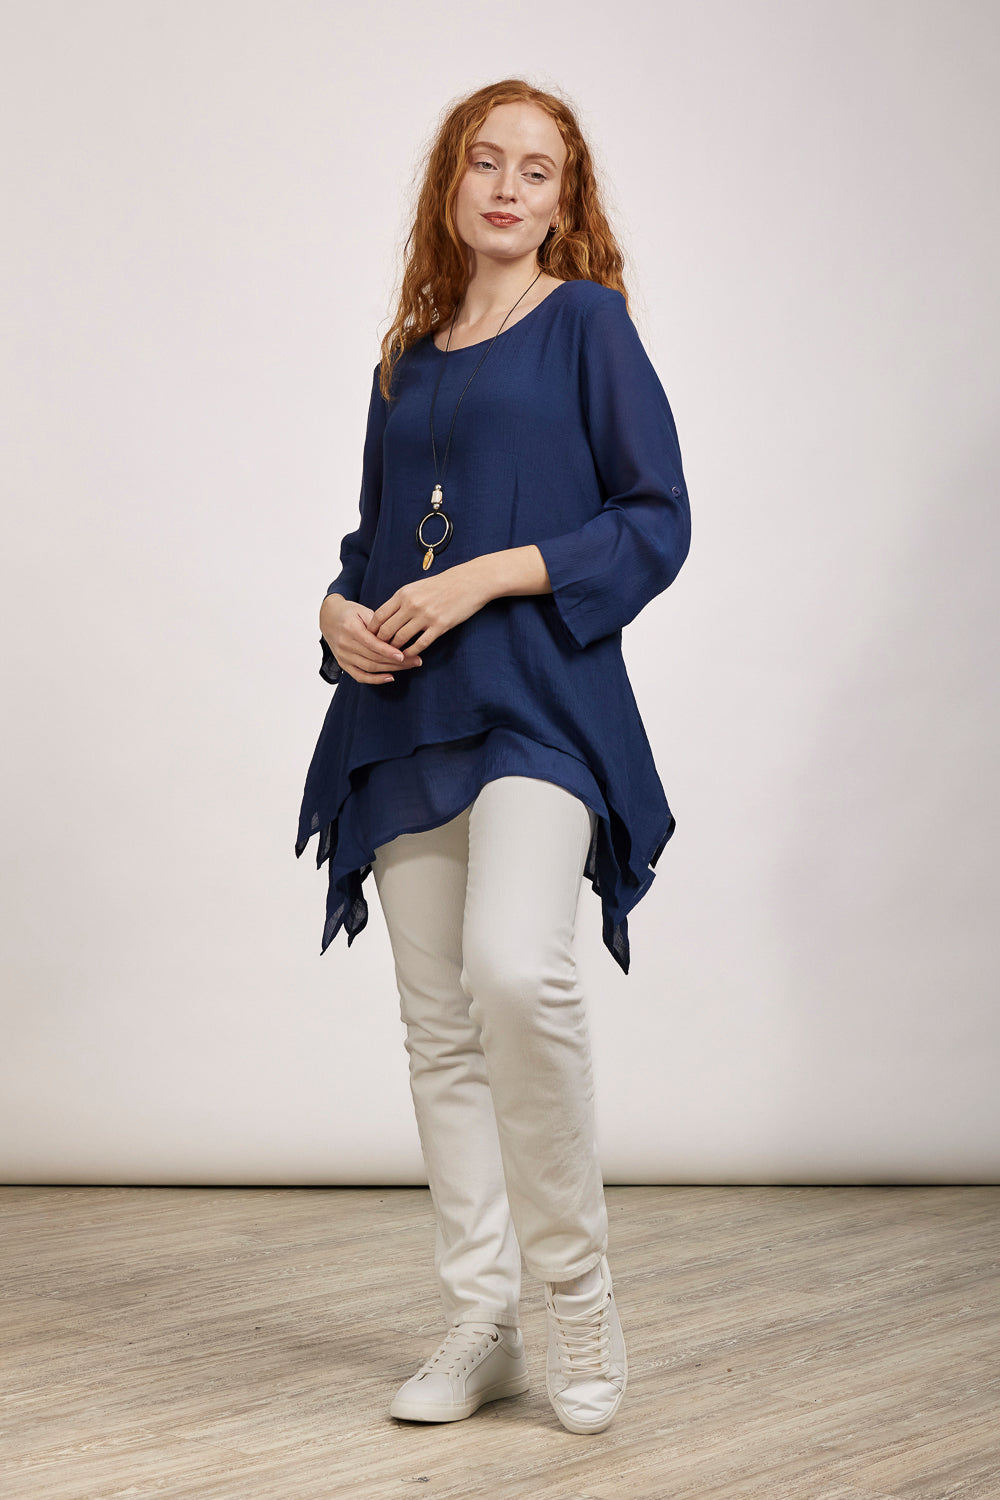 Layered Hanky Hem Top With Necklace